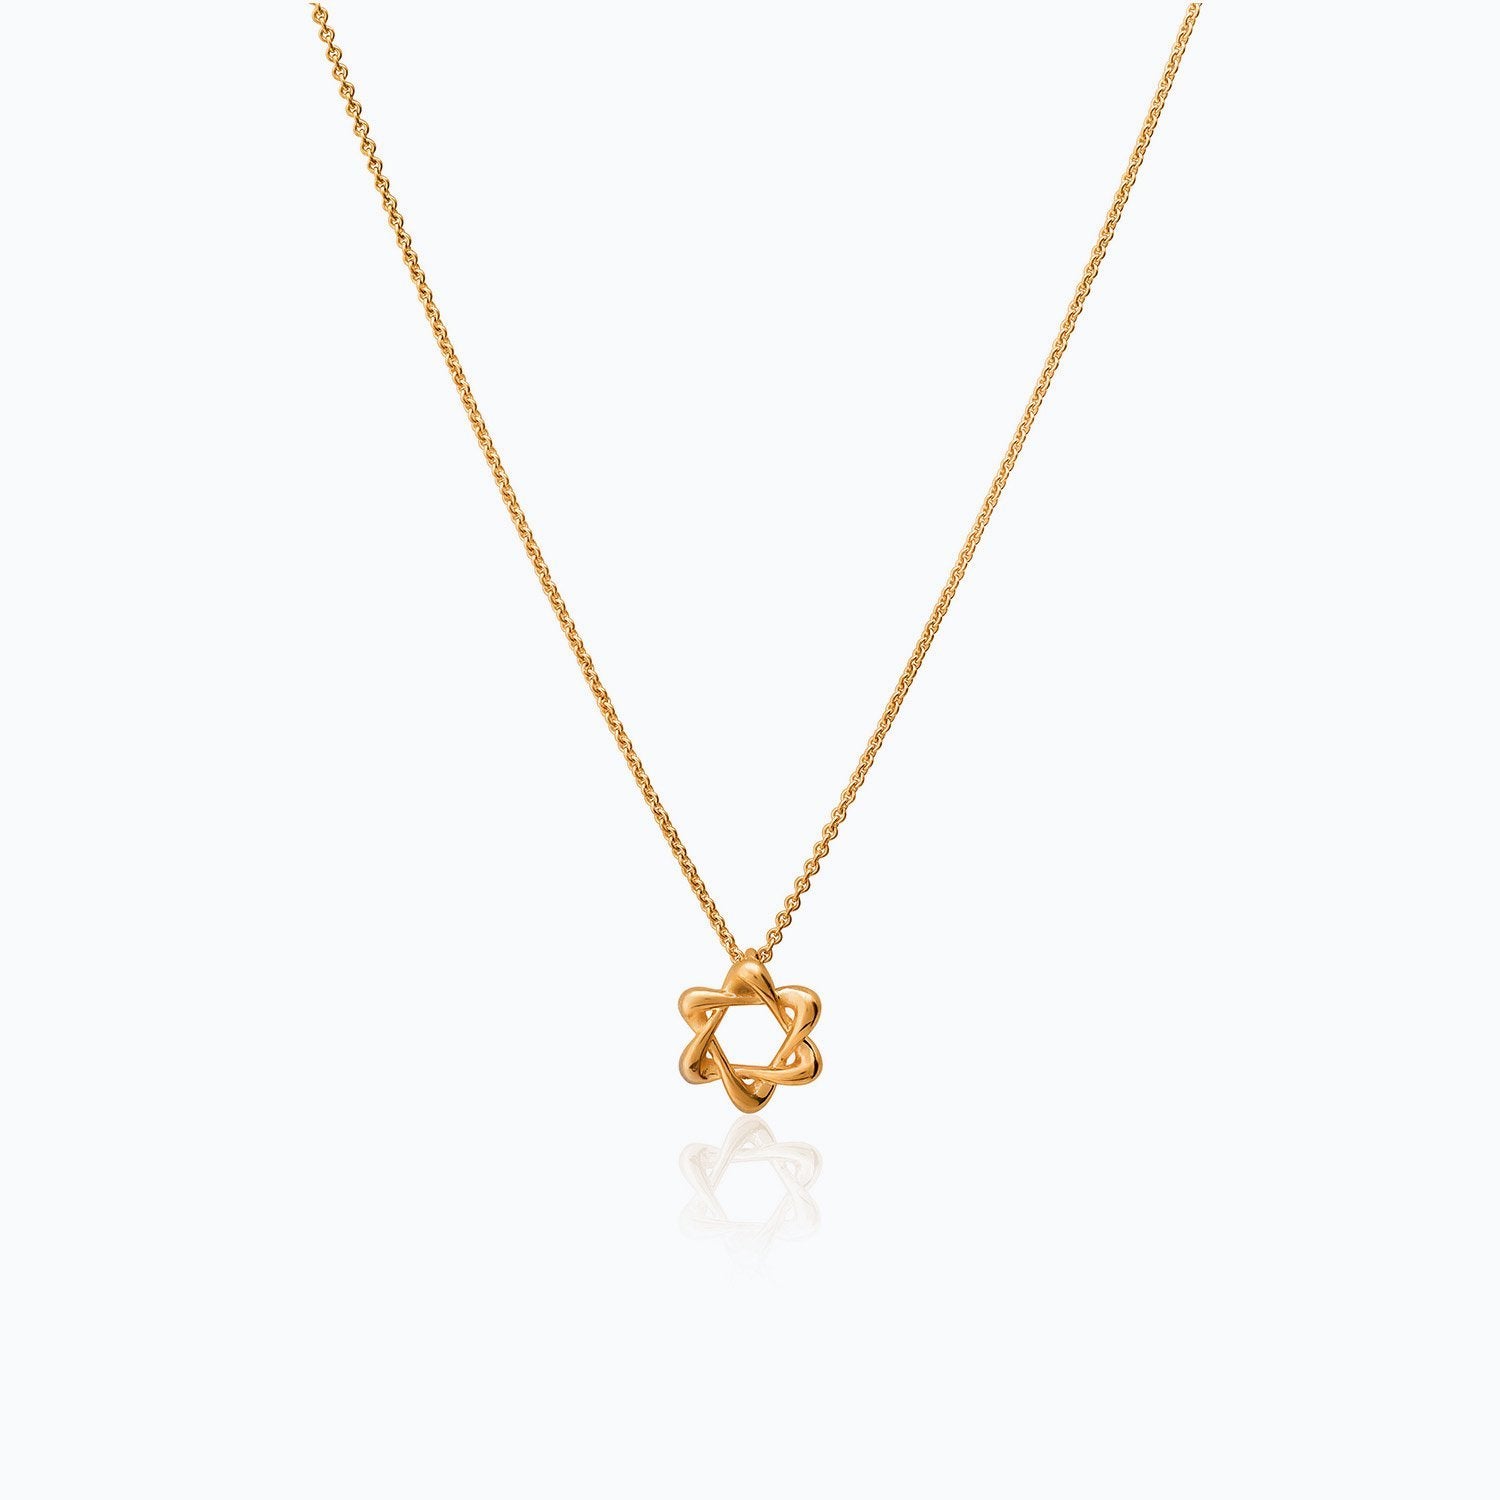 SMALL STAR OF DAVID PENDANT WITH VOLUME